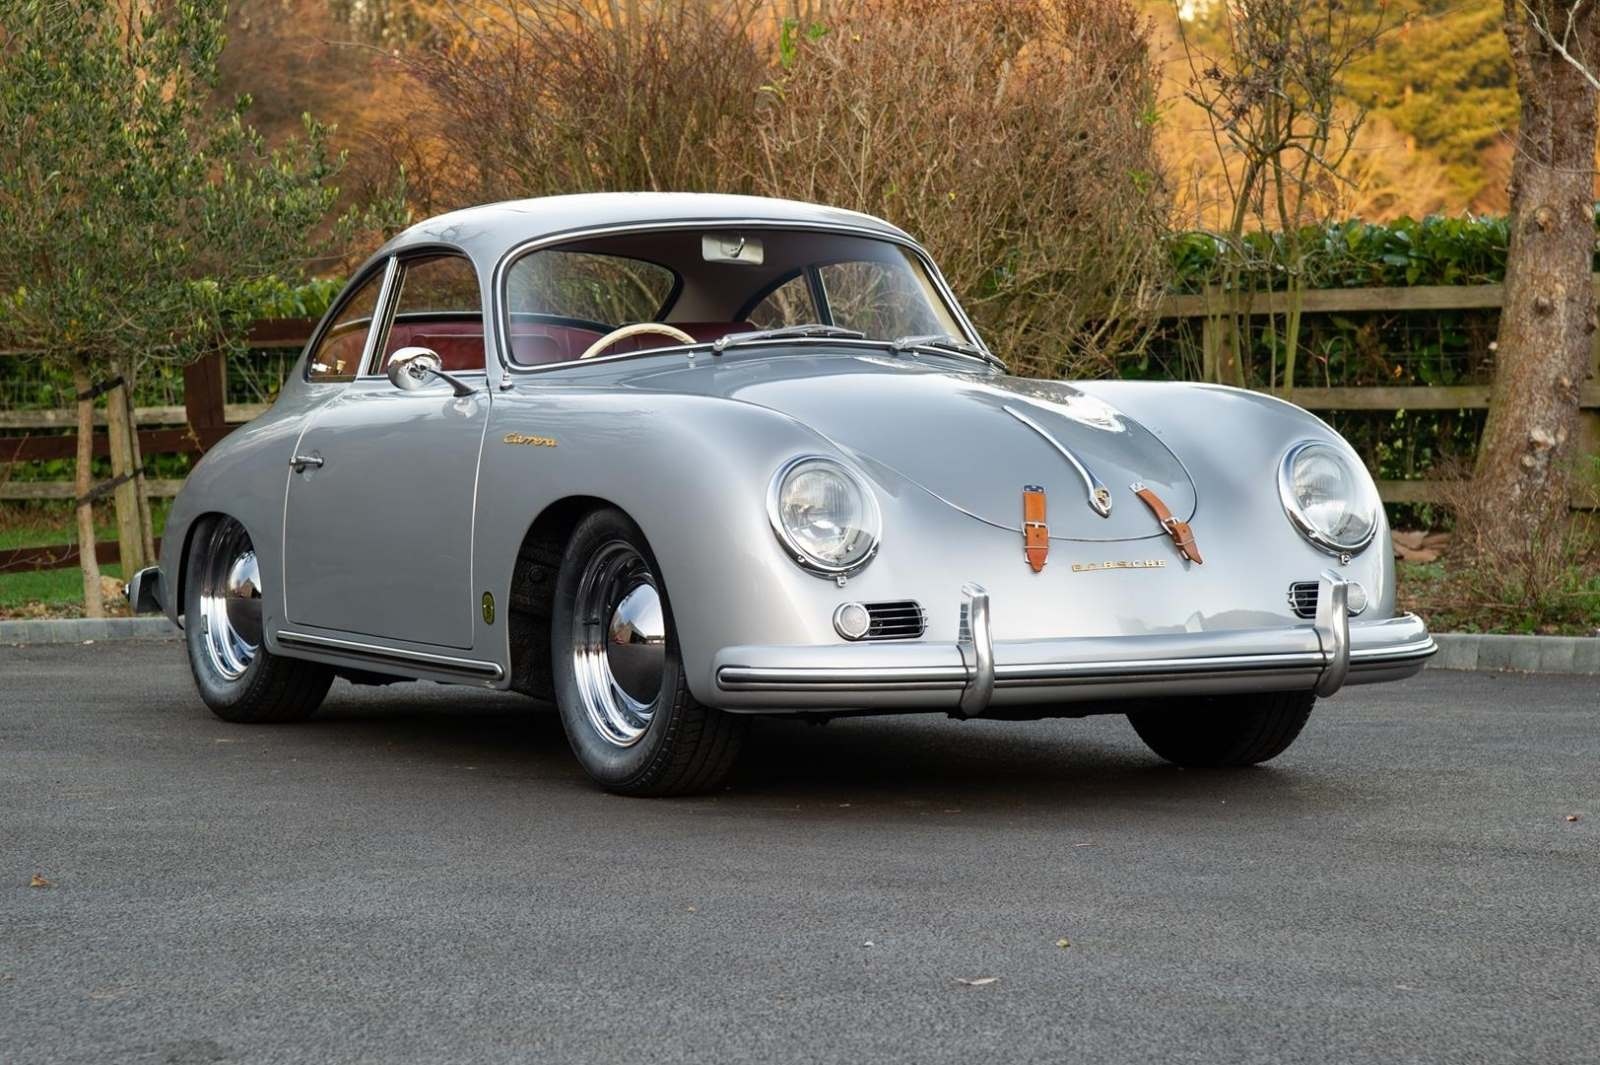 1957 Porsche 356A GS Carrera Coupe for sale - Vehicle Sales - DK Engineering